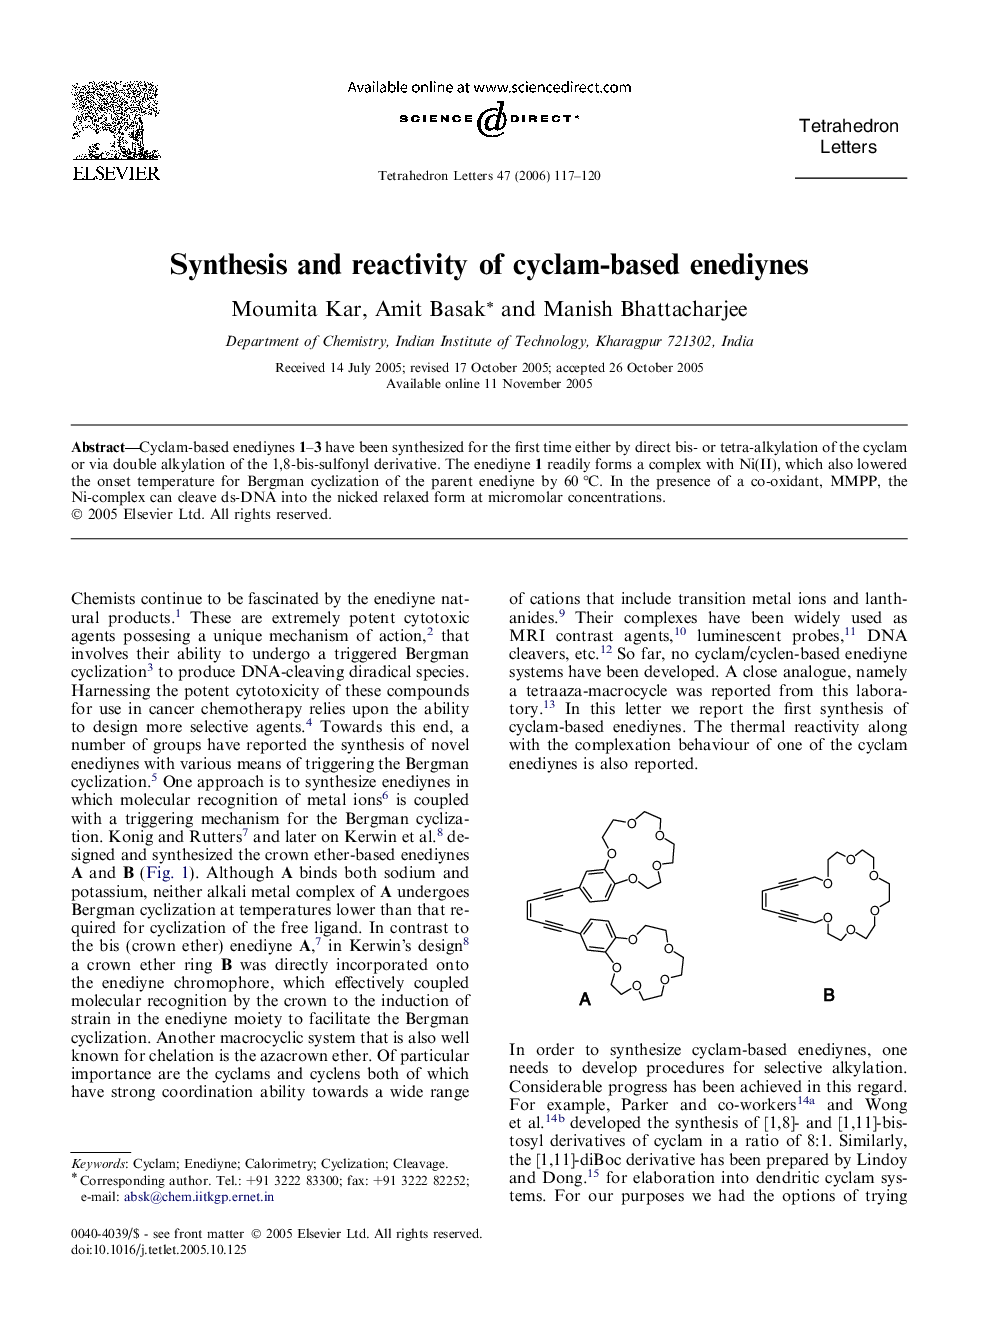 Synthesis and reactivity of cyclam-based enediynes